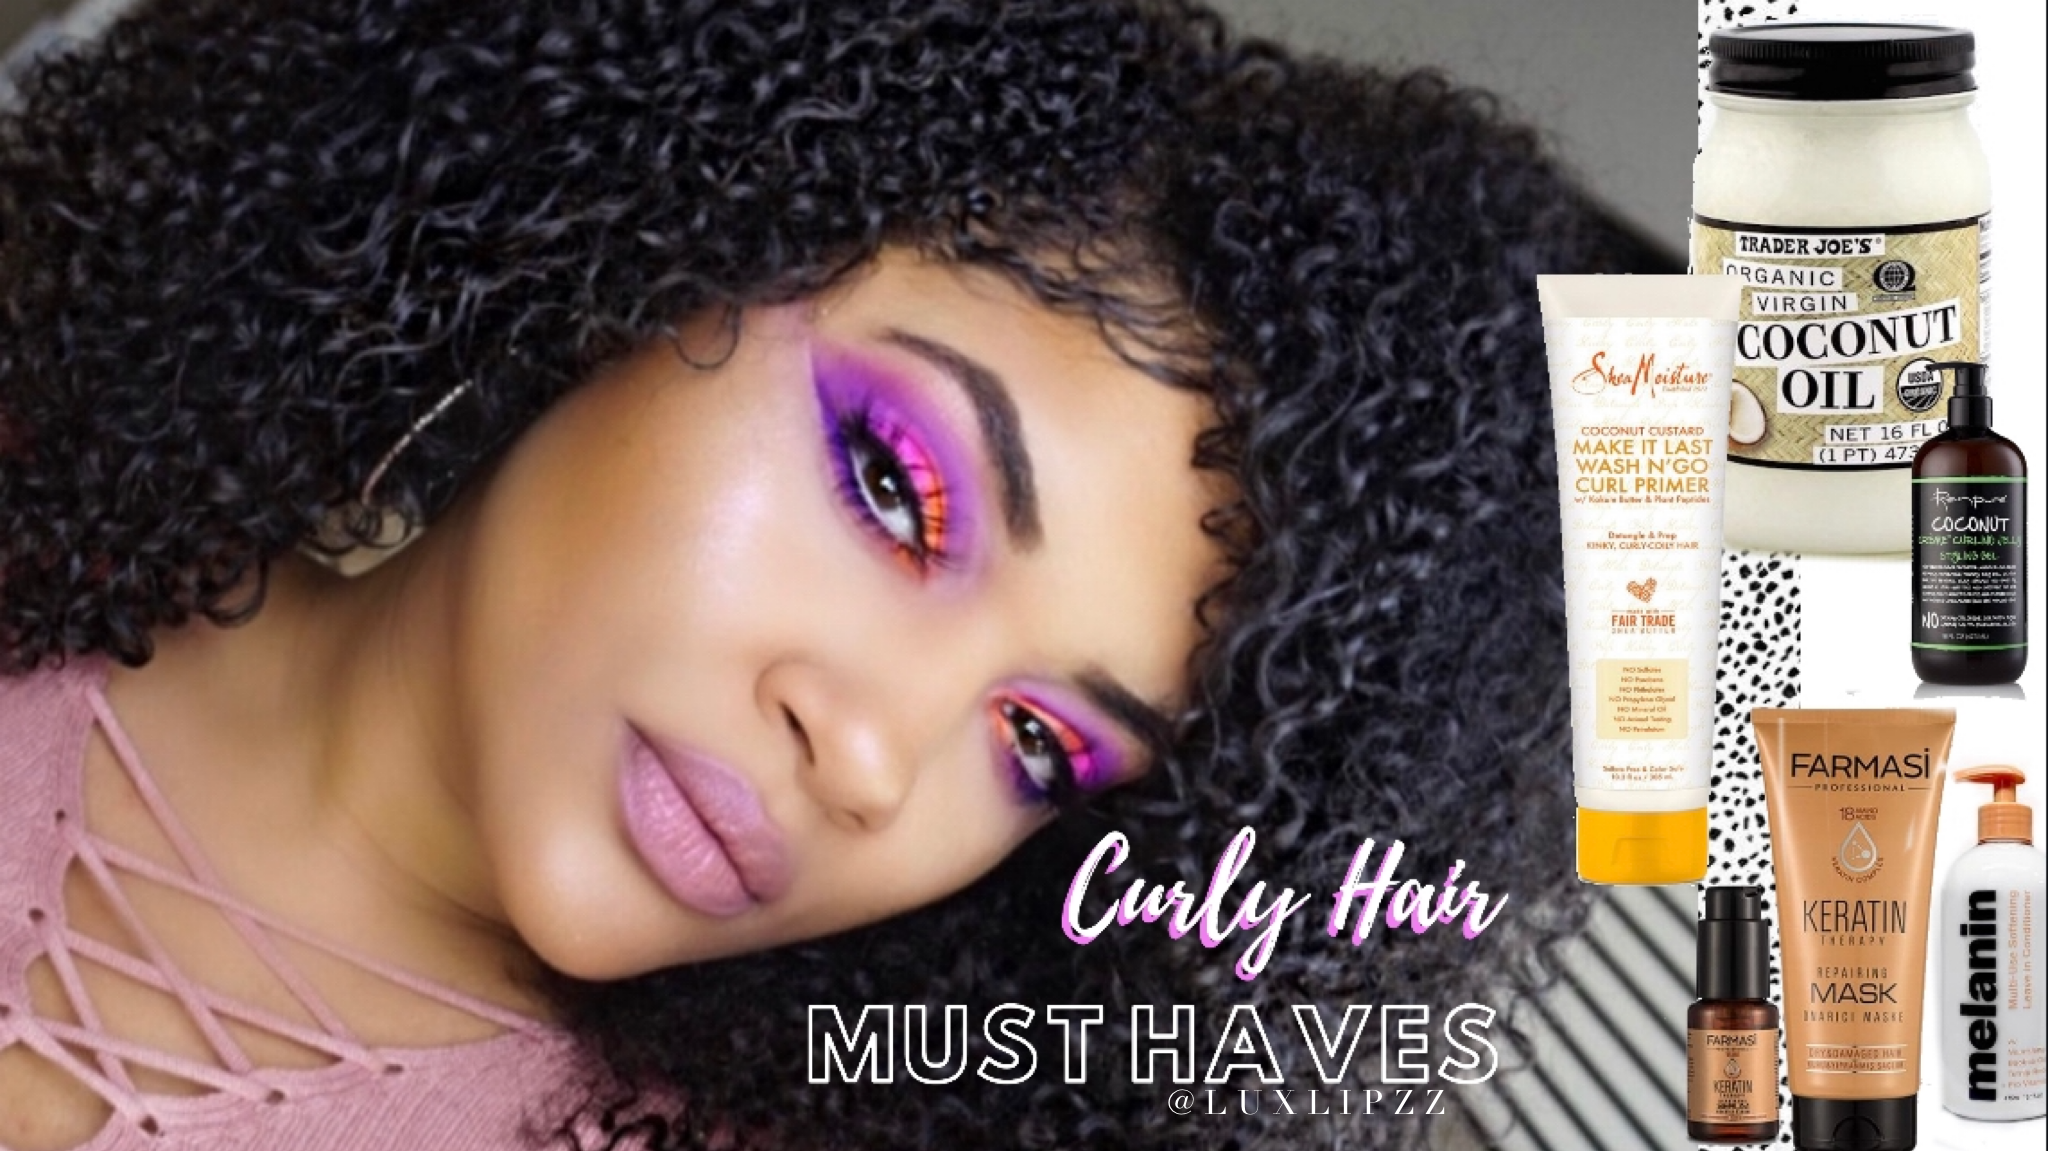 Best Curly Hair Products 2020 — Best Curly Hair Products 2020